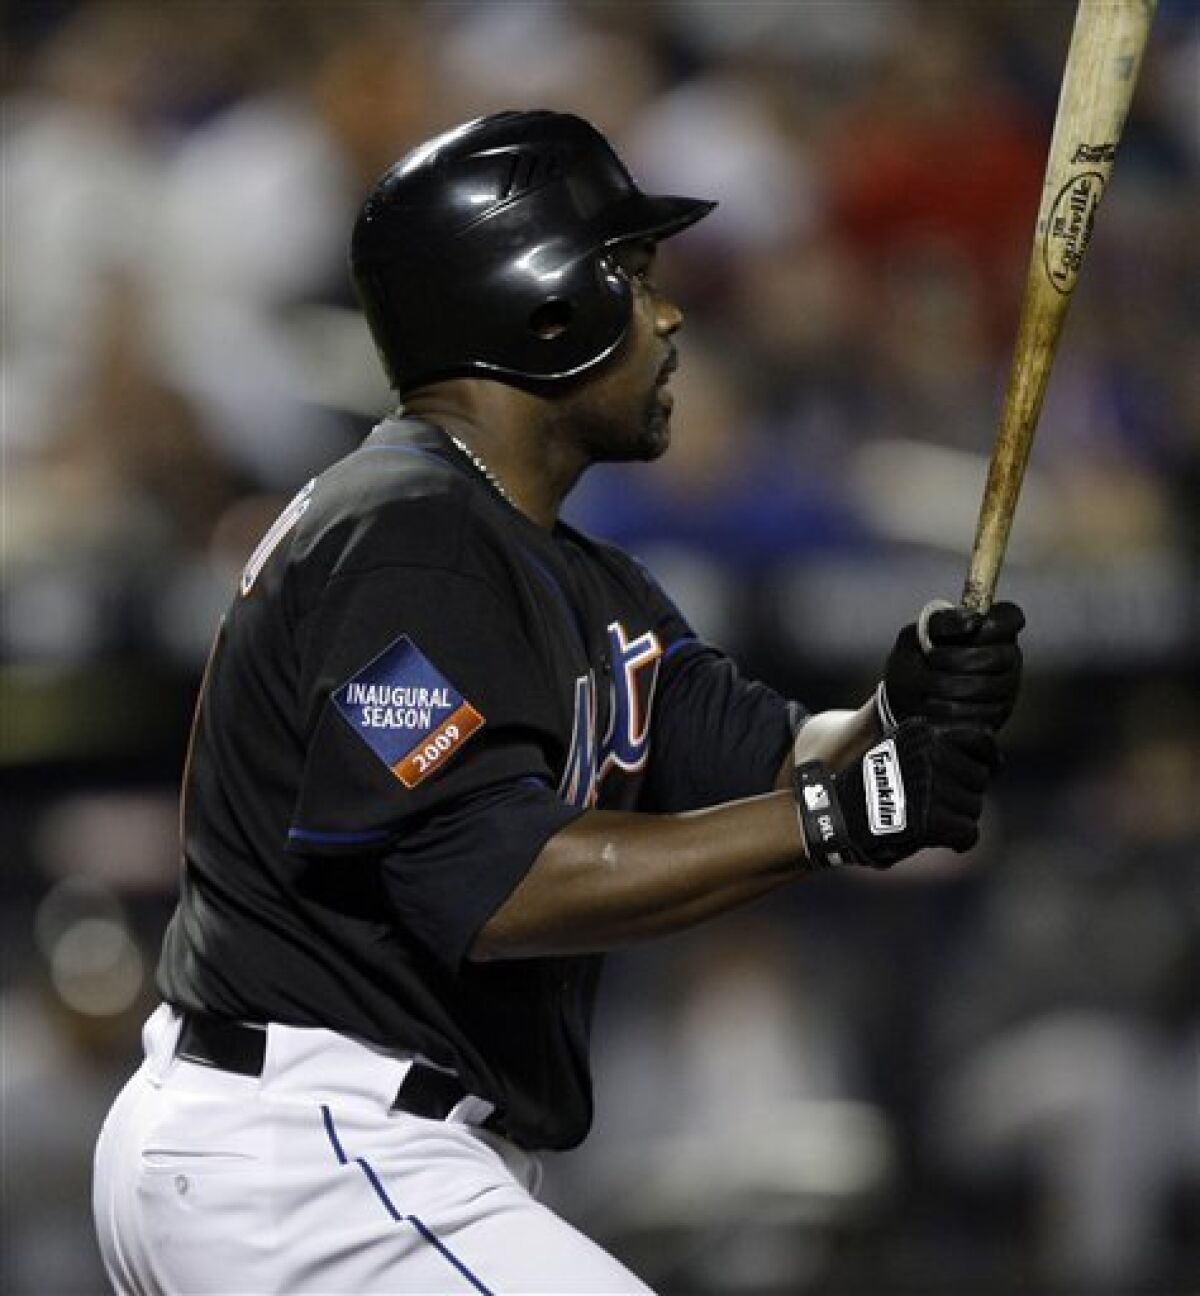 New York Mets' Carlos Delgado watches his eighth inning three-run home run sail over the right field wall against the Pittsburgh Pirates during a baseball game Friday, May 8, 2009 at Citi Field in New York. (AP Photo/Julie Jacobson)